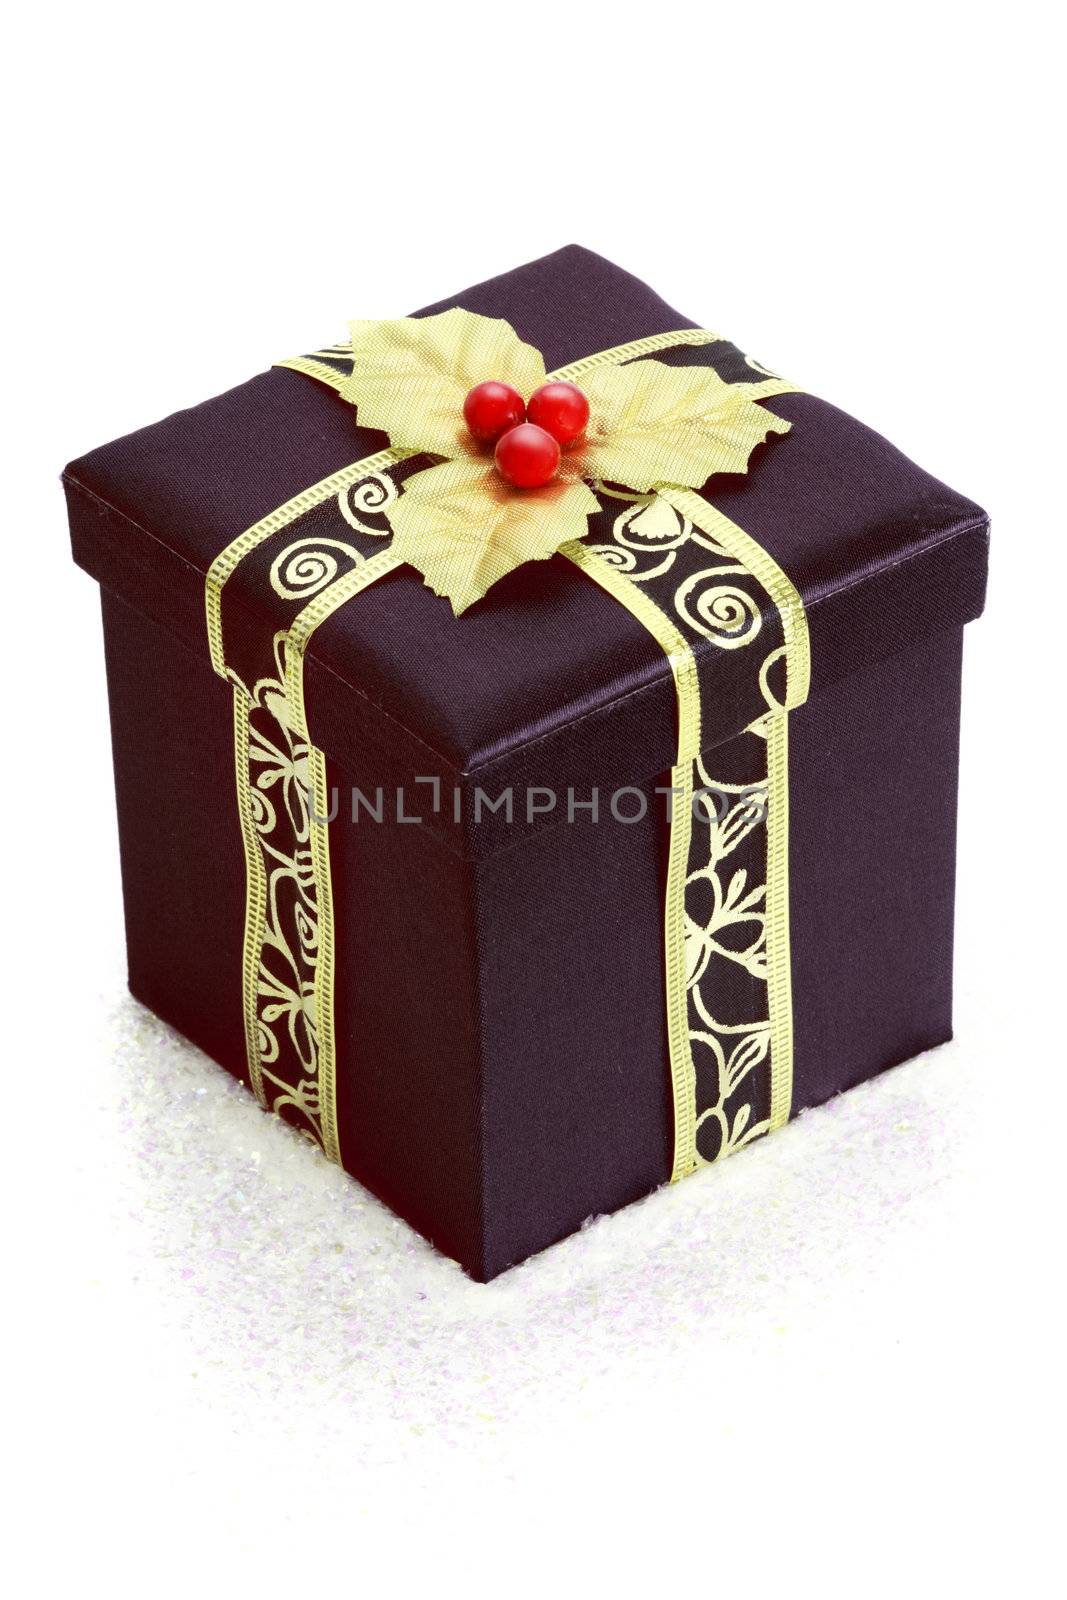 black and gold xmas present box by lanalanglois